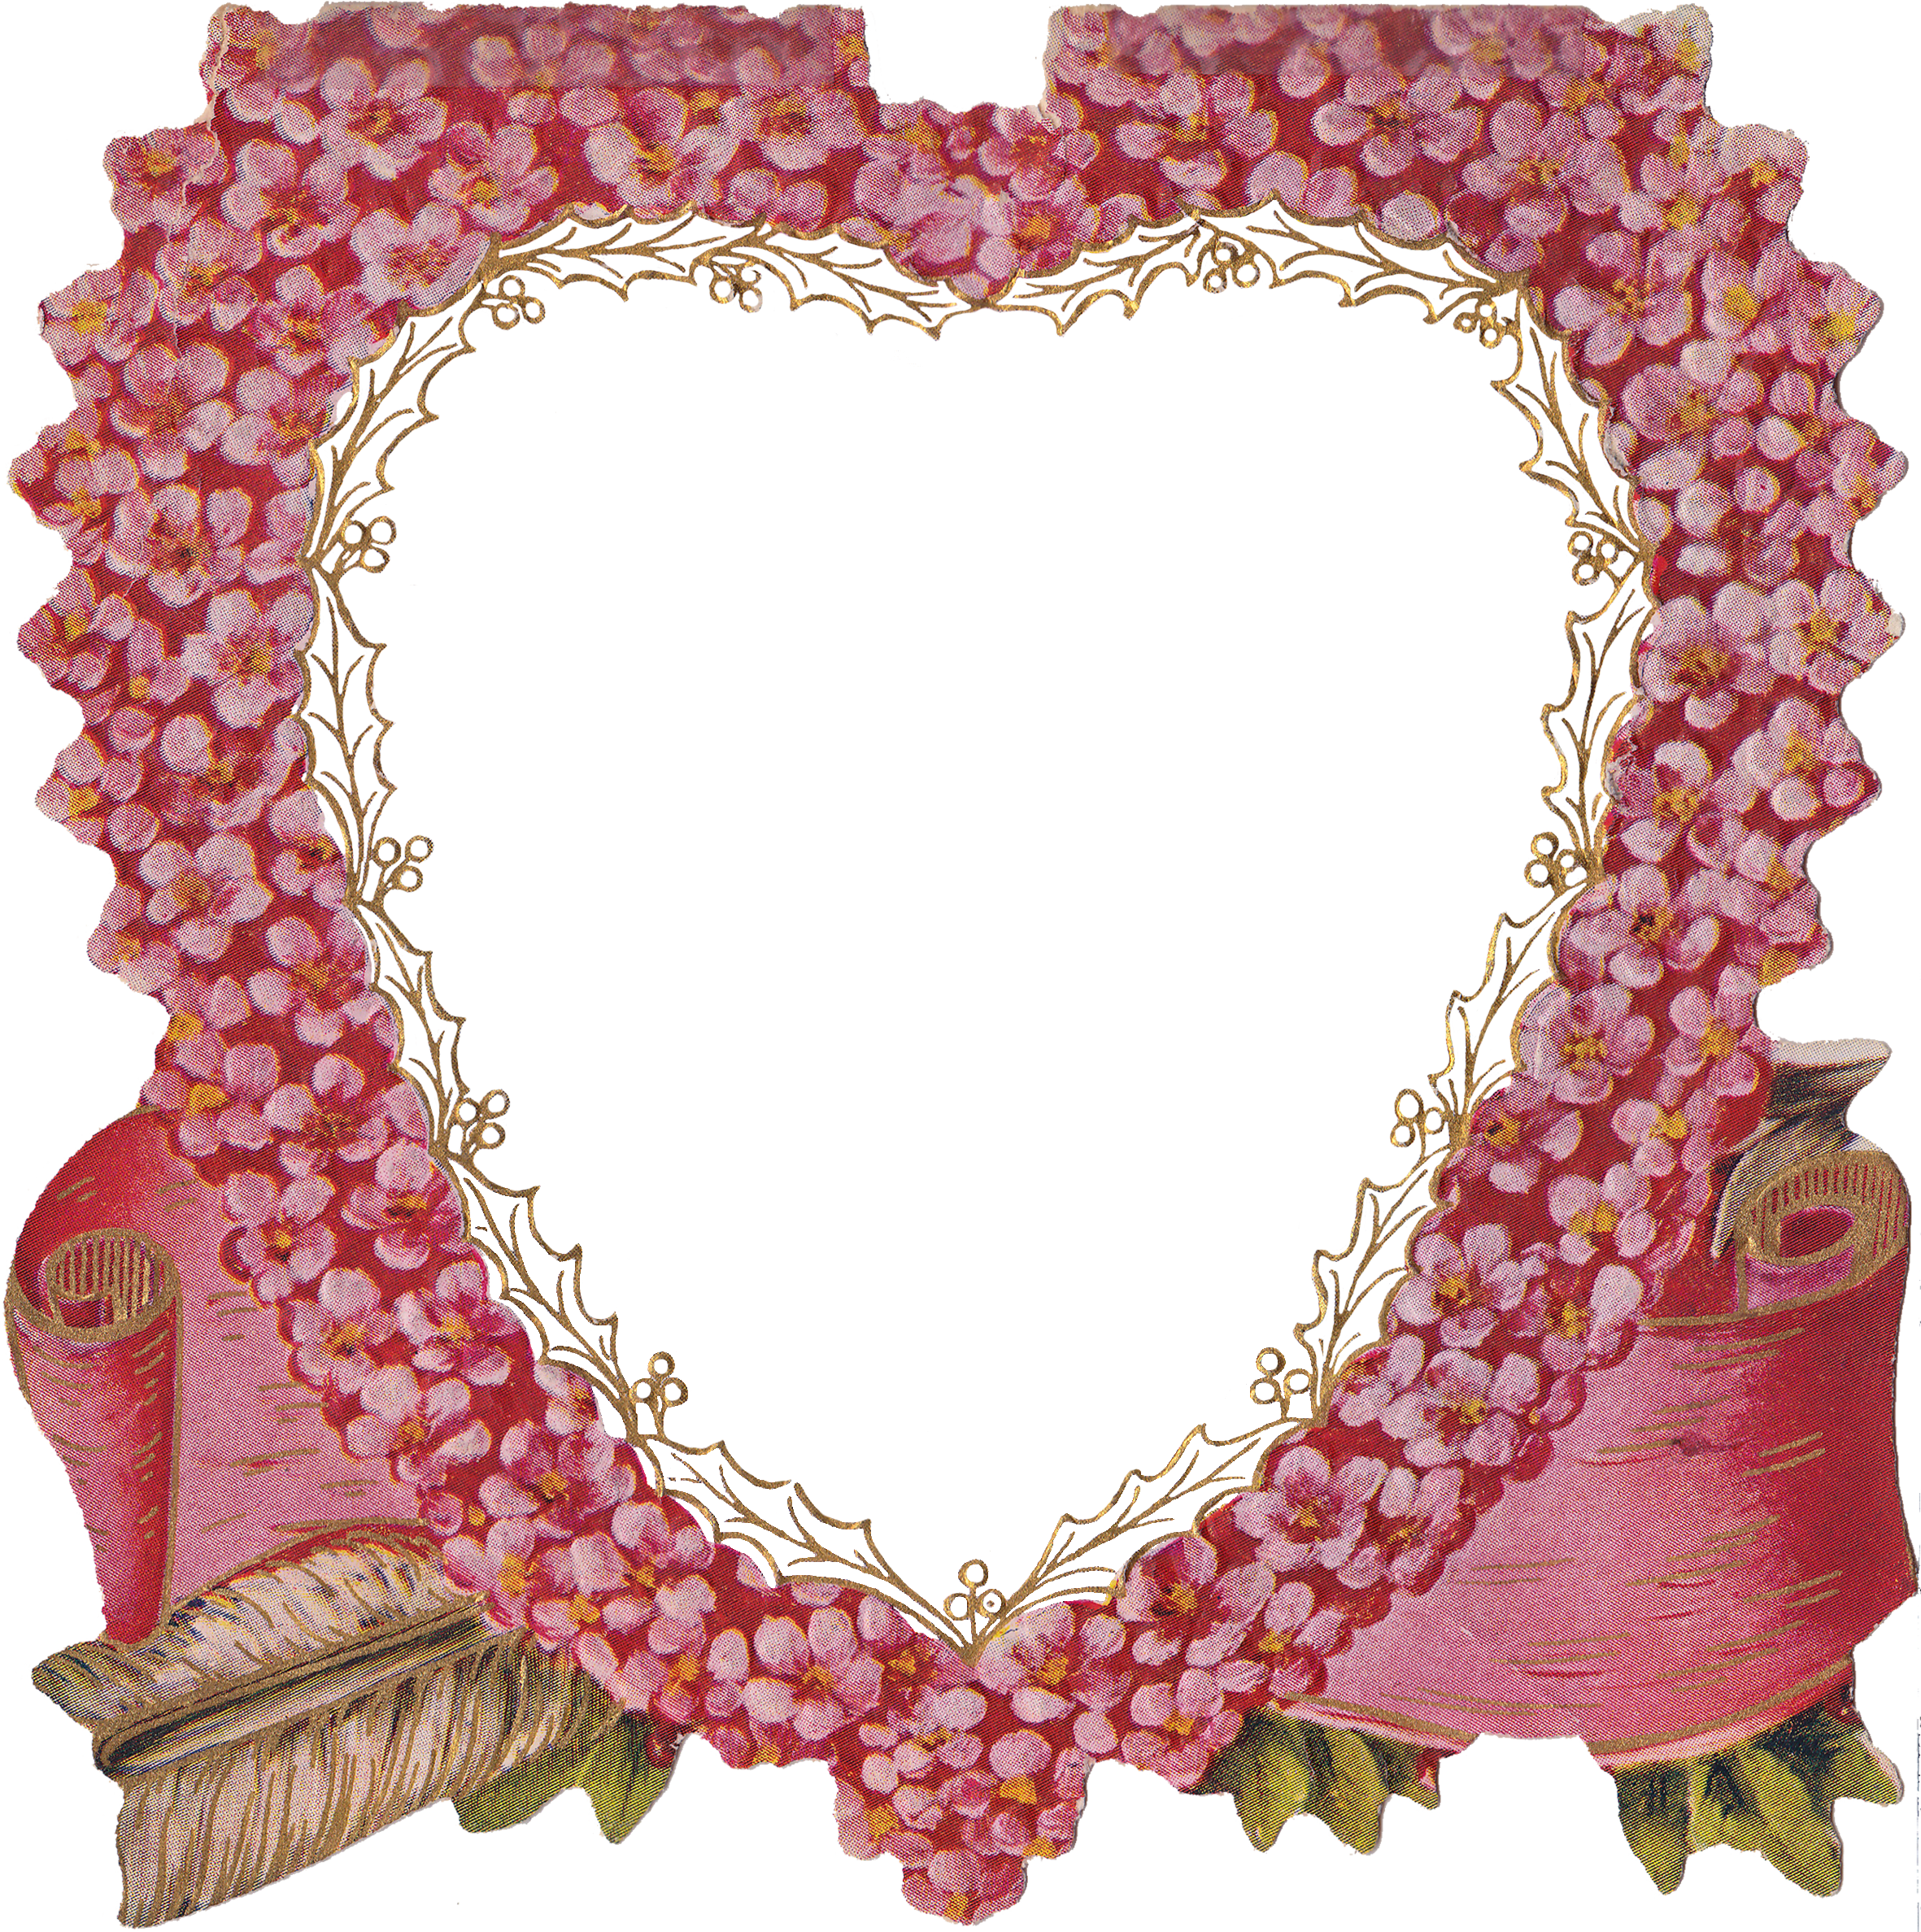 A Heart Shaped Picture Frame With Pink Flowers And A Ribbon